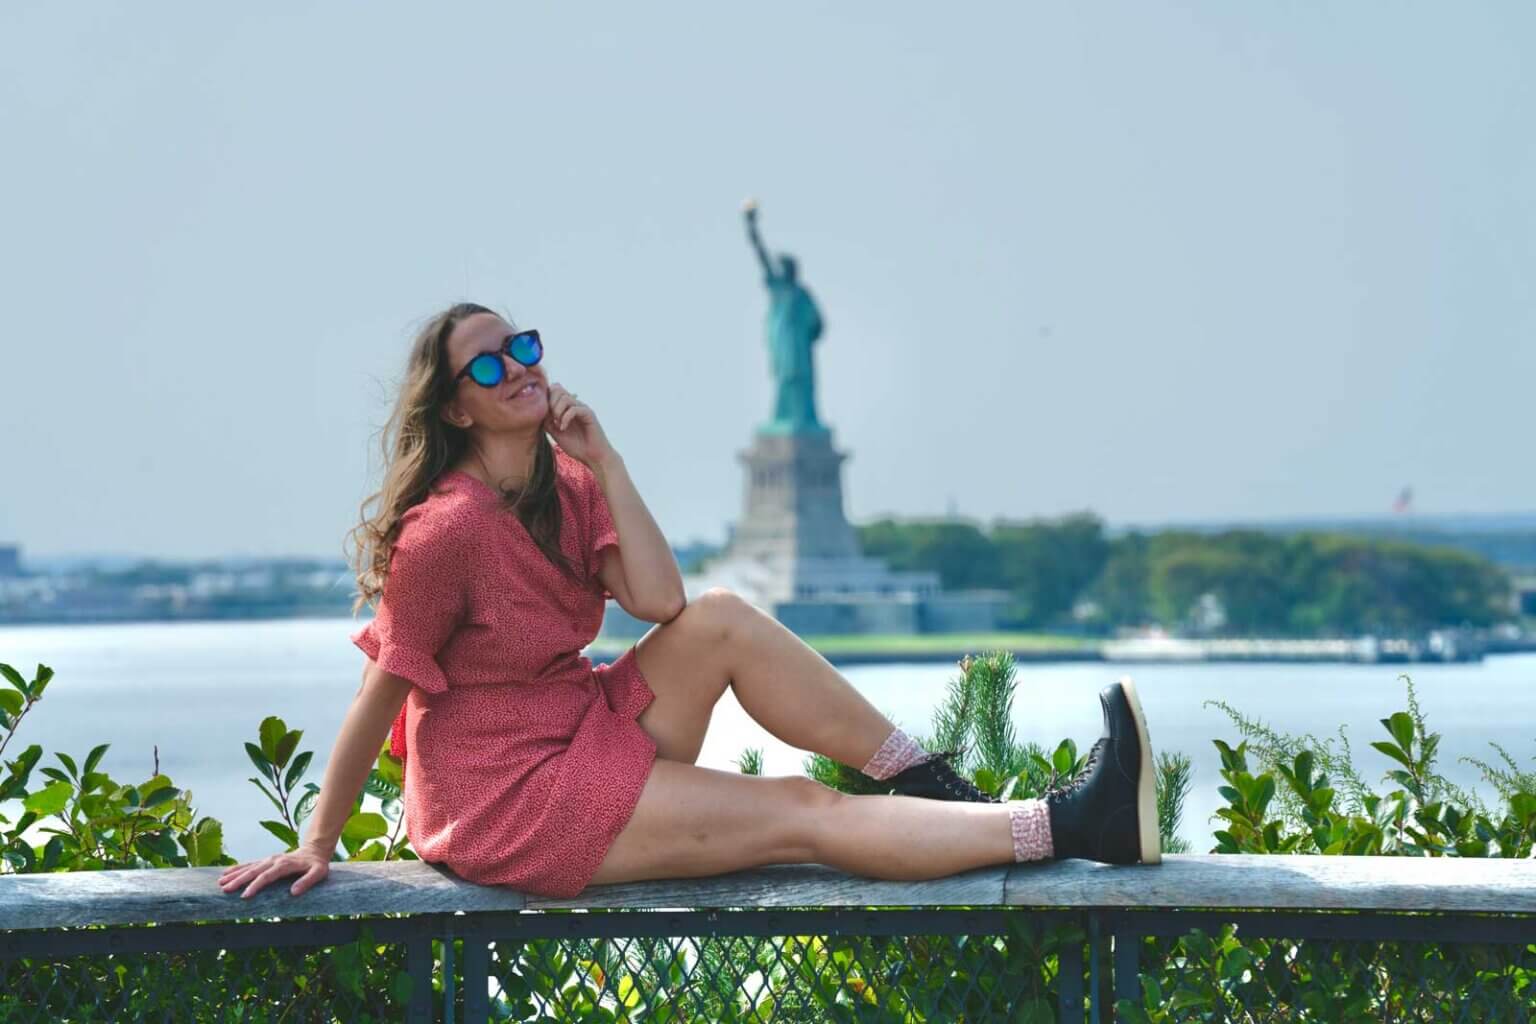 megan-at-the-hill-on-governors-island-in-nyc-with-the-statue-of-liberty-in-the-background